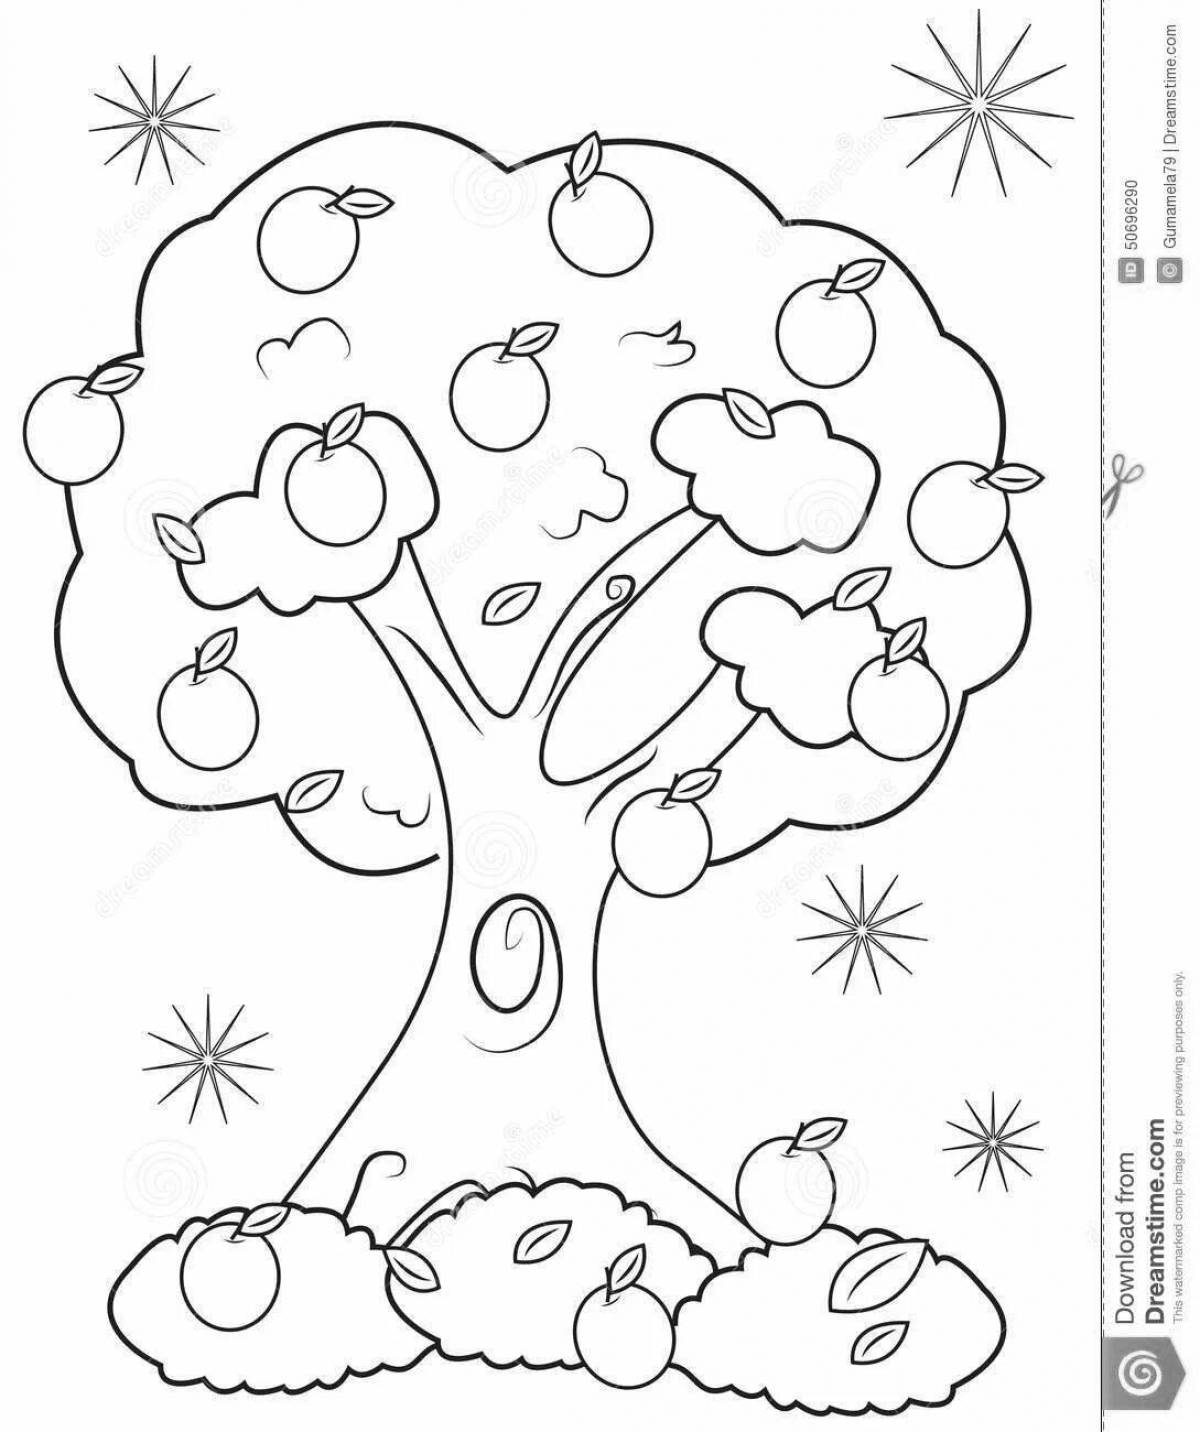 A cheerful apple tree with apples for preschoolers